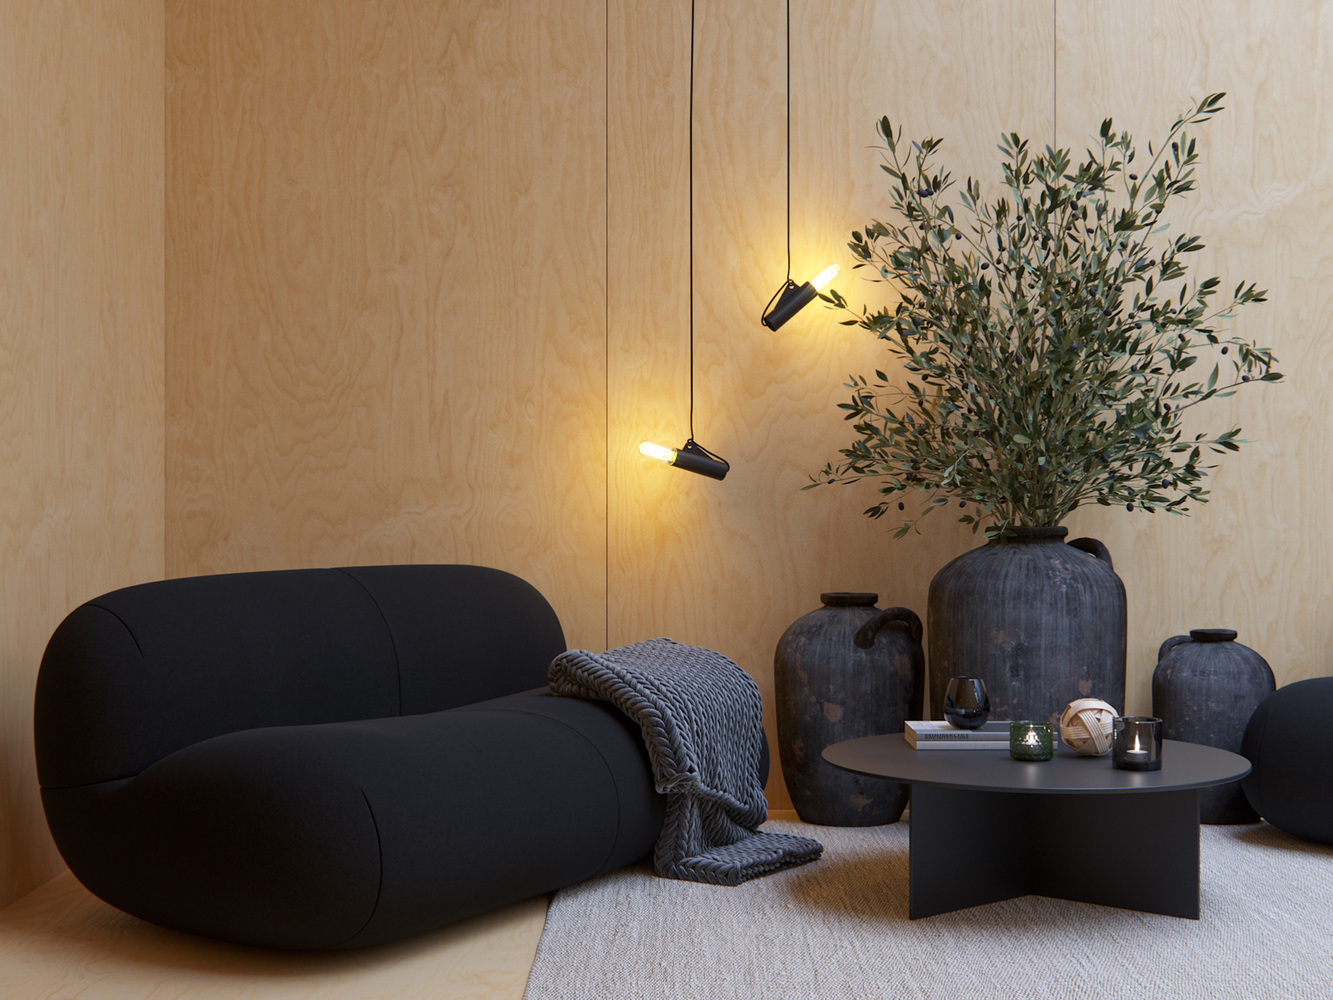 A black sofa and coffee table pop against a light wood wall behind them